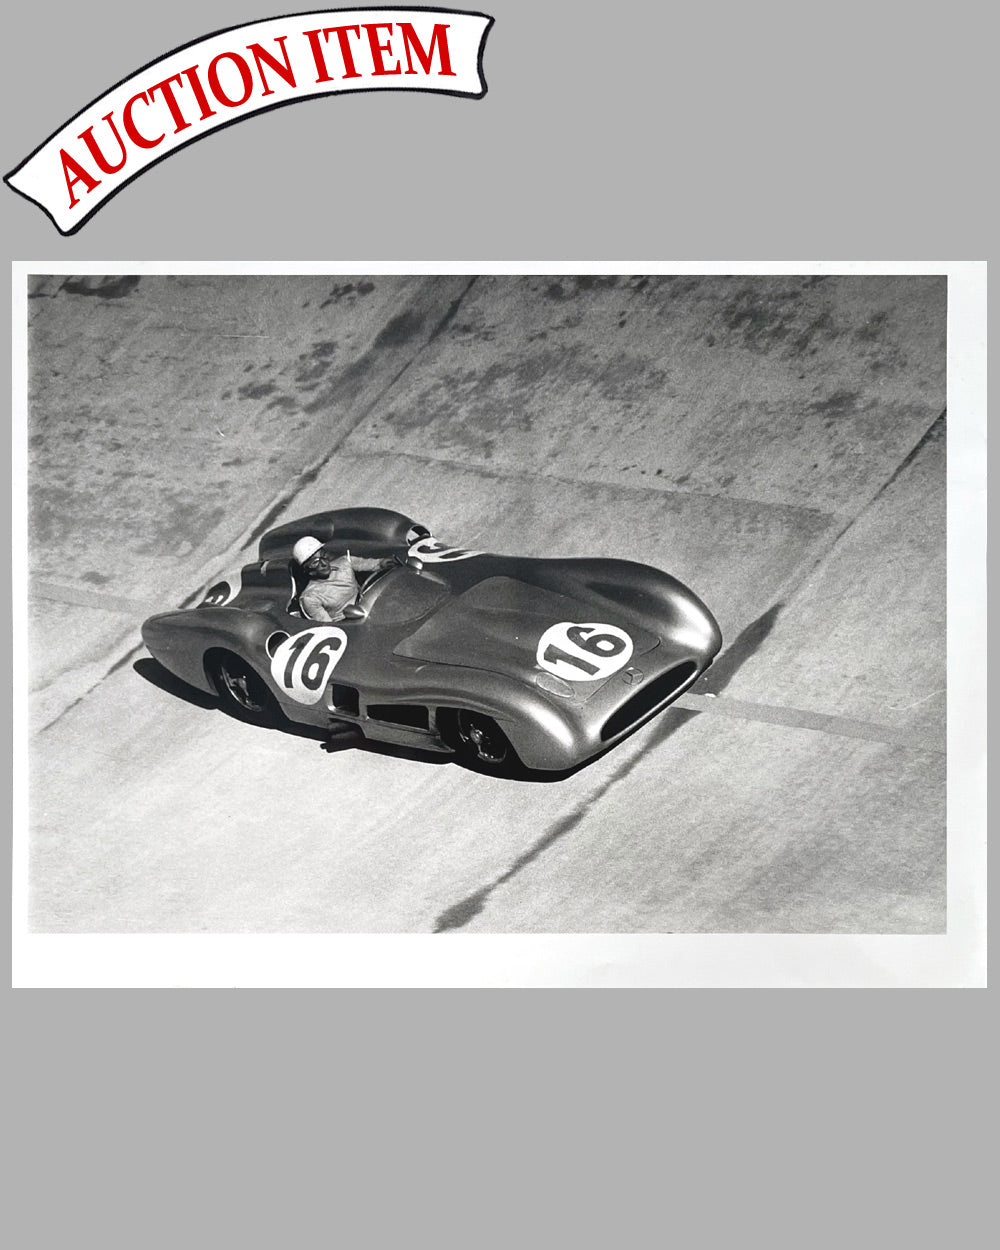 Stirling Moss at speed 1955 b&w photograph